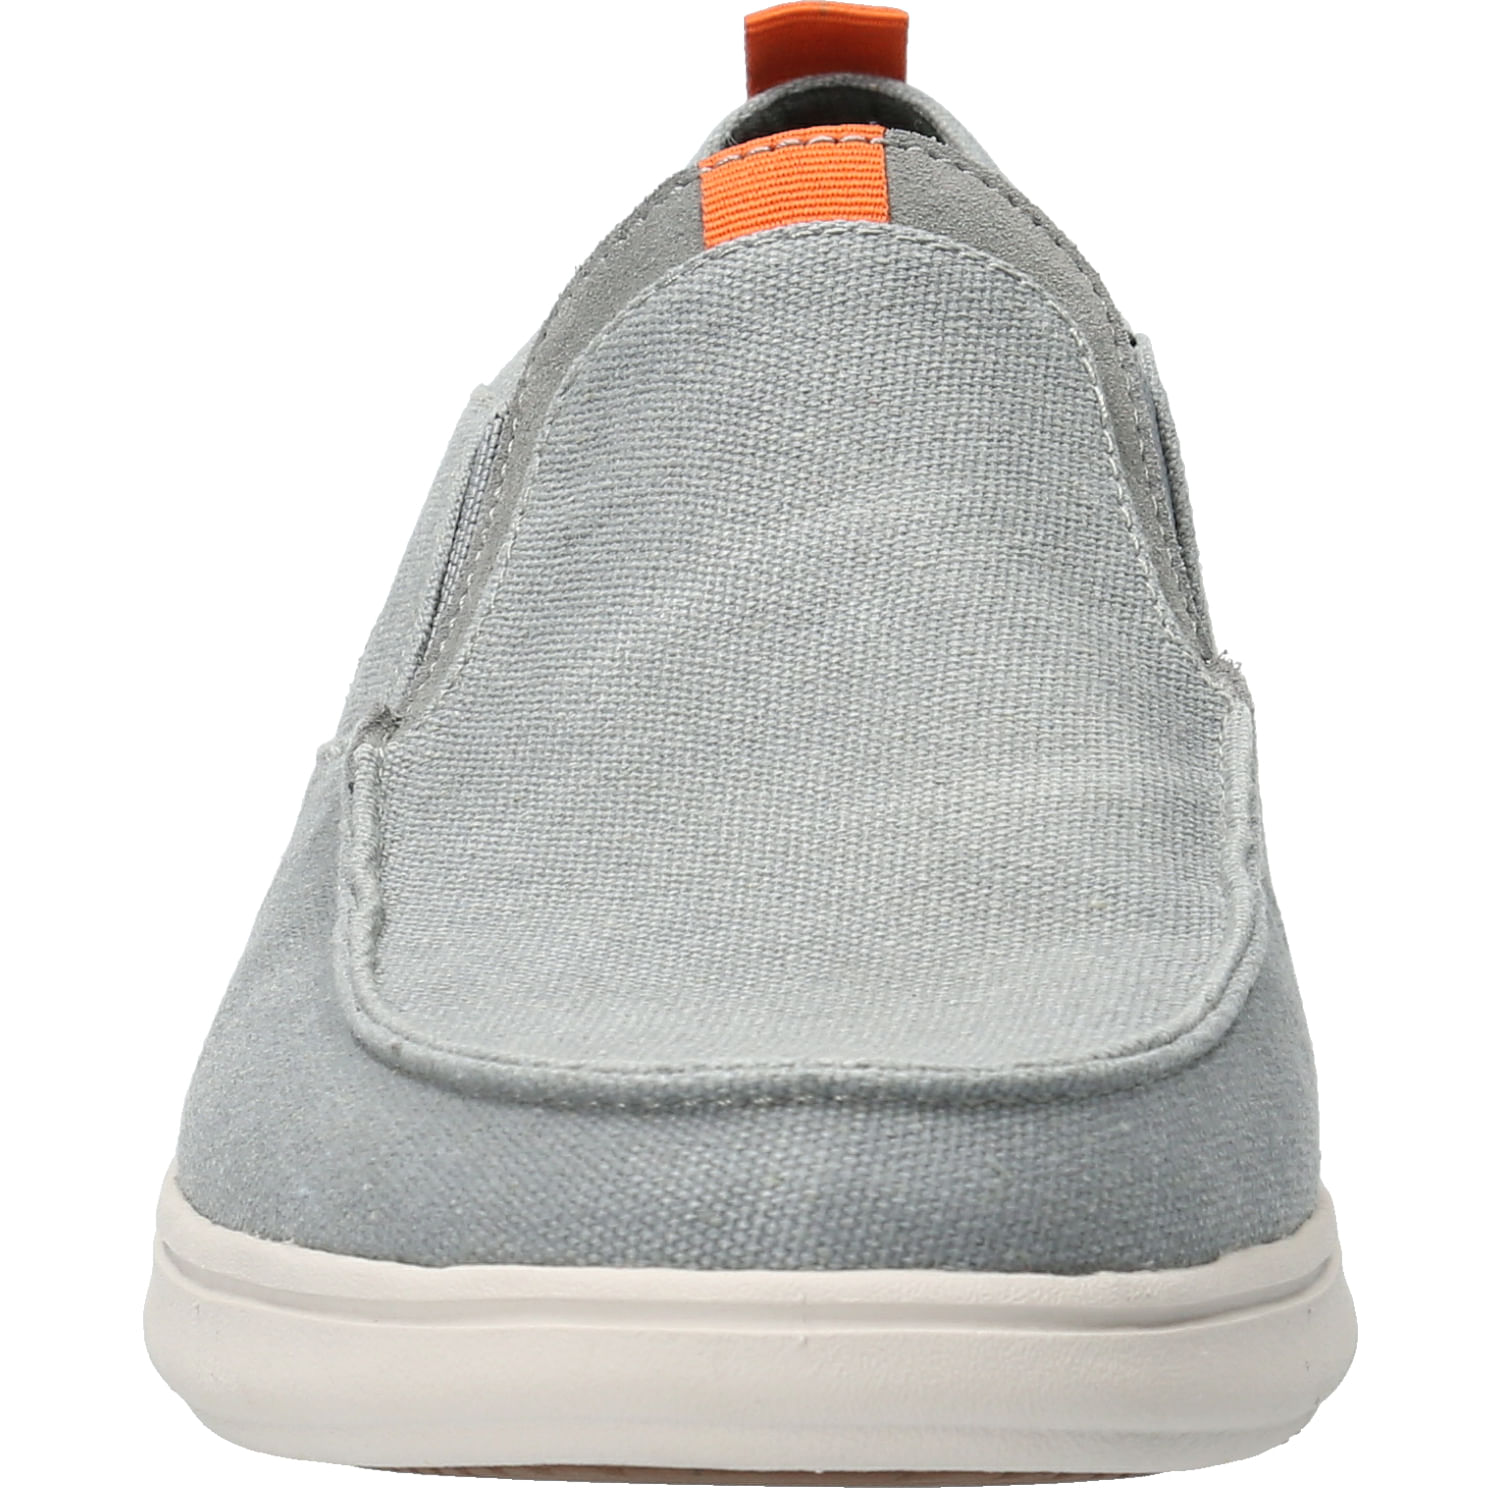 Slip On Hombre Bacco Gris